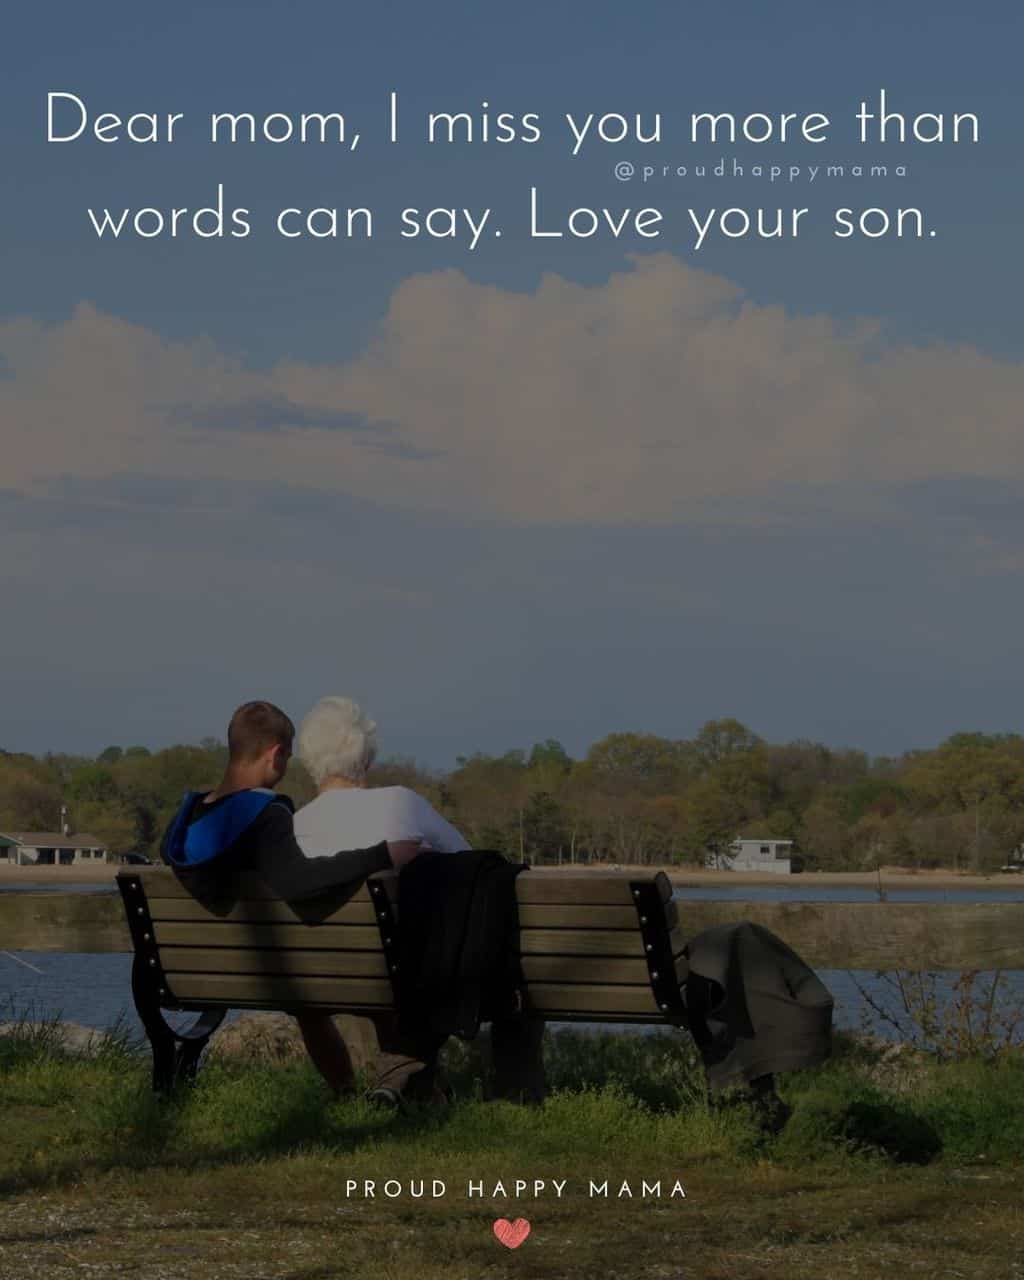 Son sitting on bench with arm around elderly mother with text overlay, ‘Dear mom, I miss you more than words can say. Love your son.’